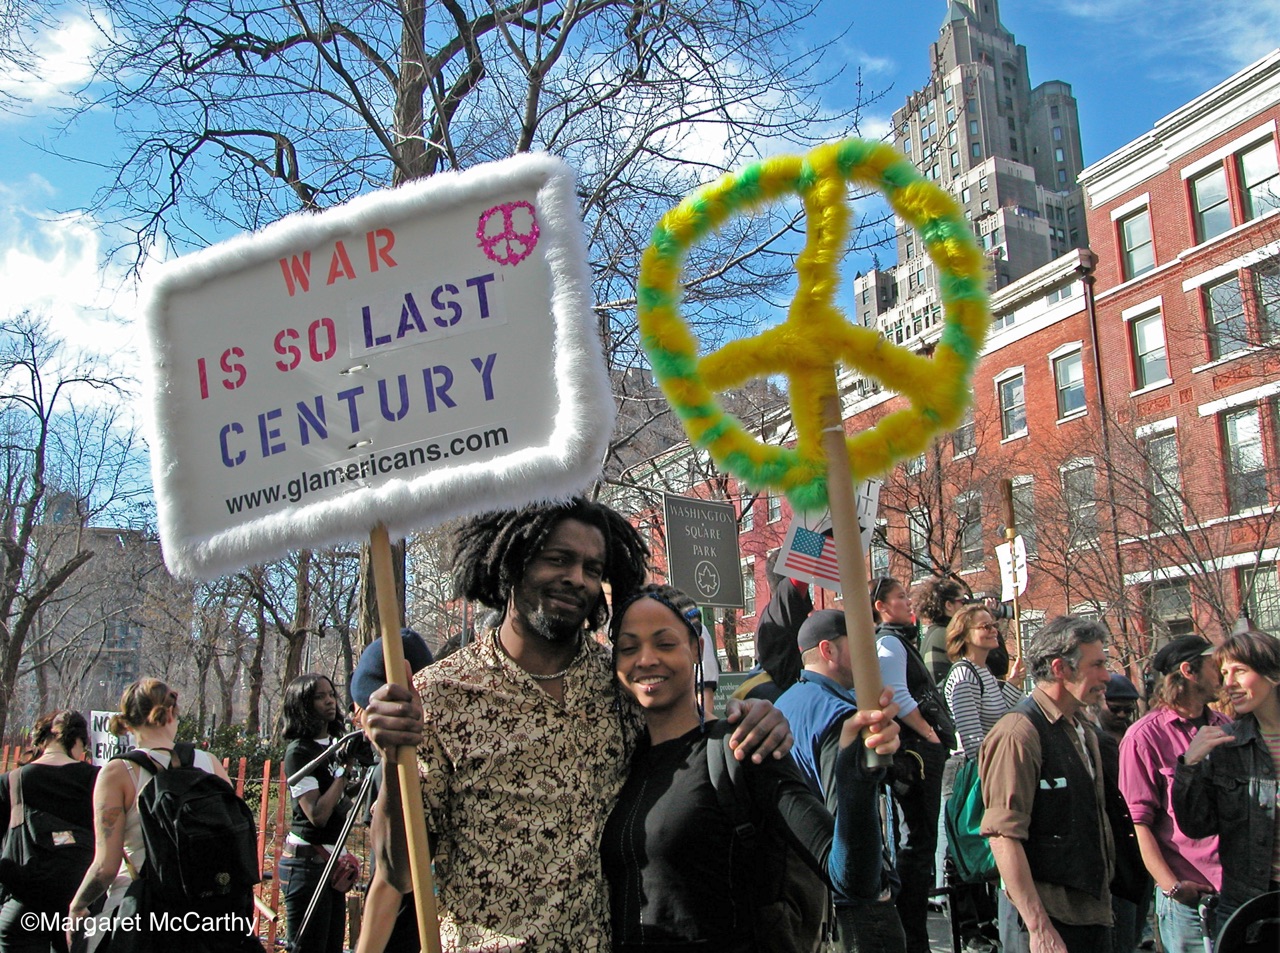 War Is So Last Centruy, Glamericans March & Rally to Protest U.S. Invasion of Iraq, NYC 03/22/2003